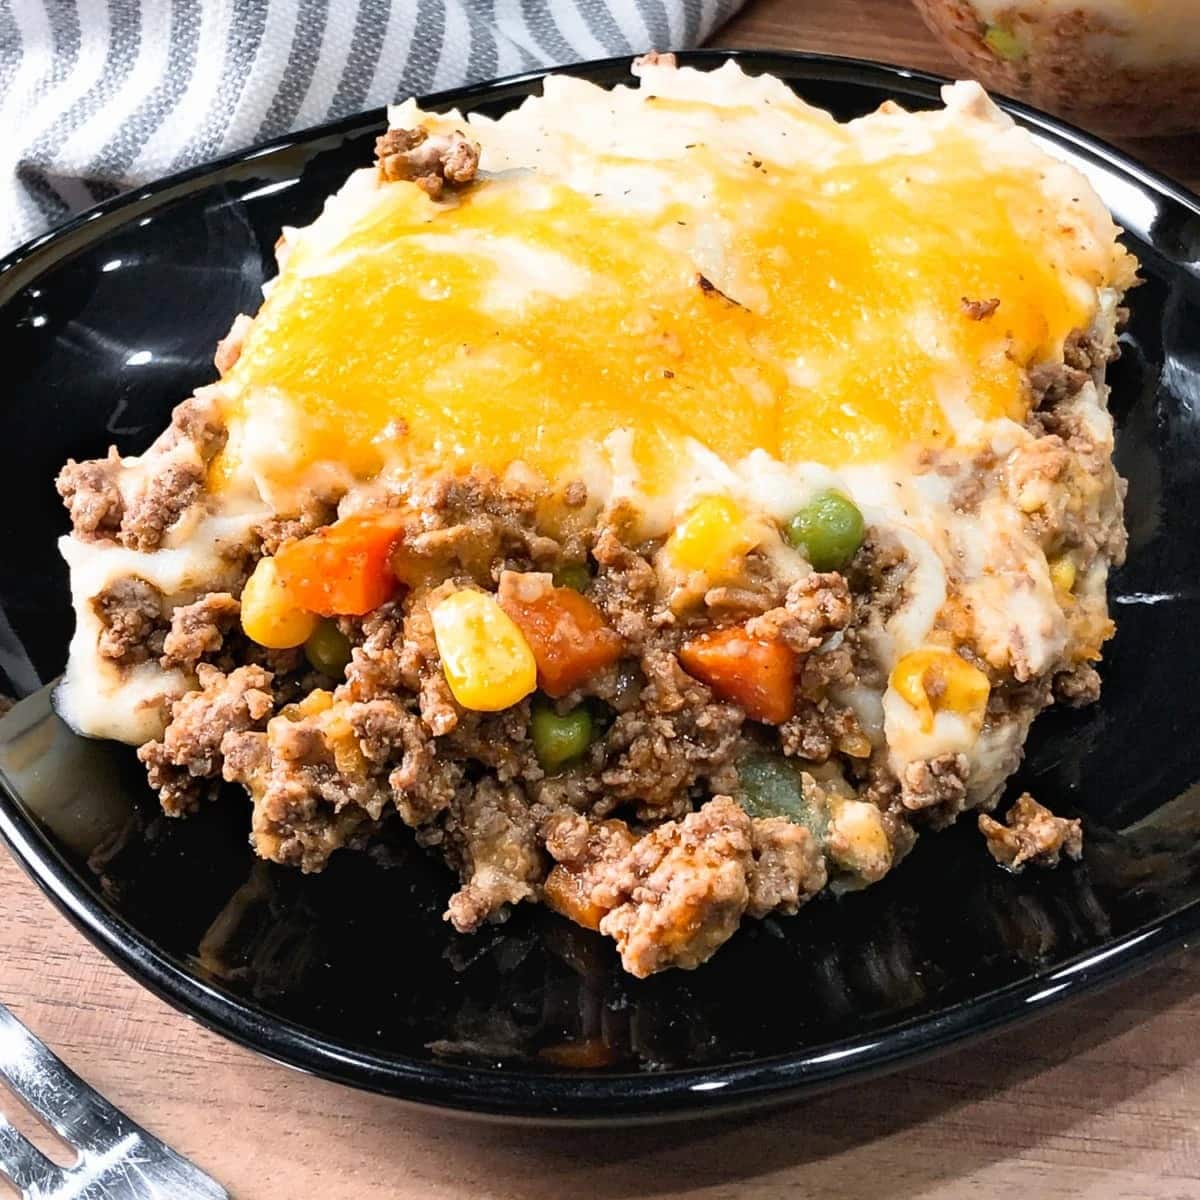 A serving of shepherd's pie with cheesy toppings.